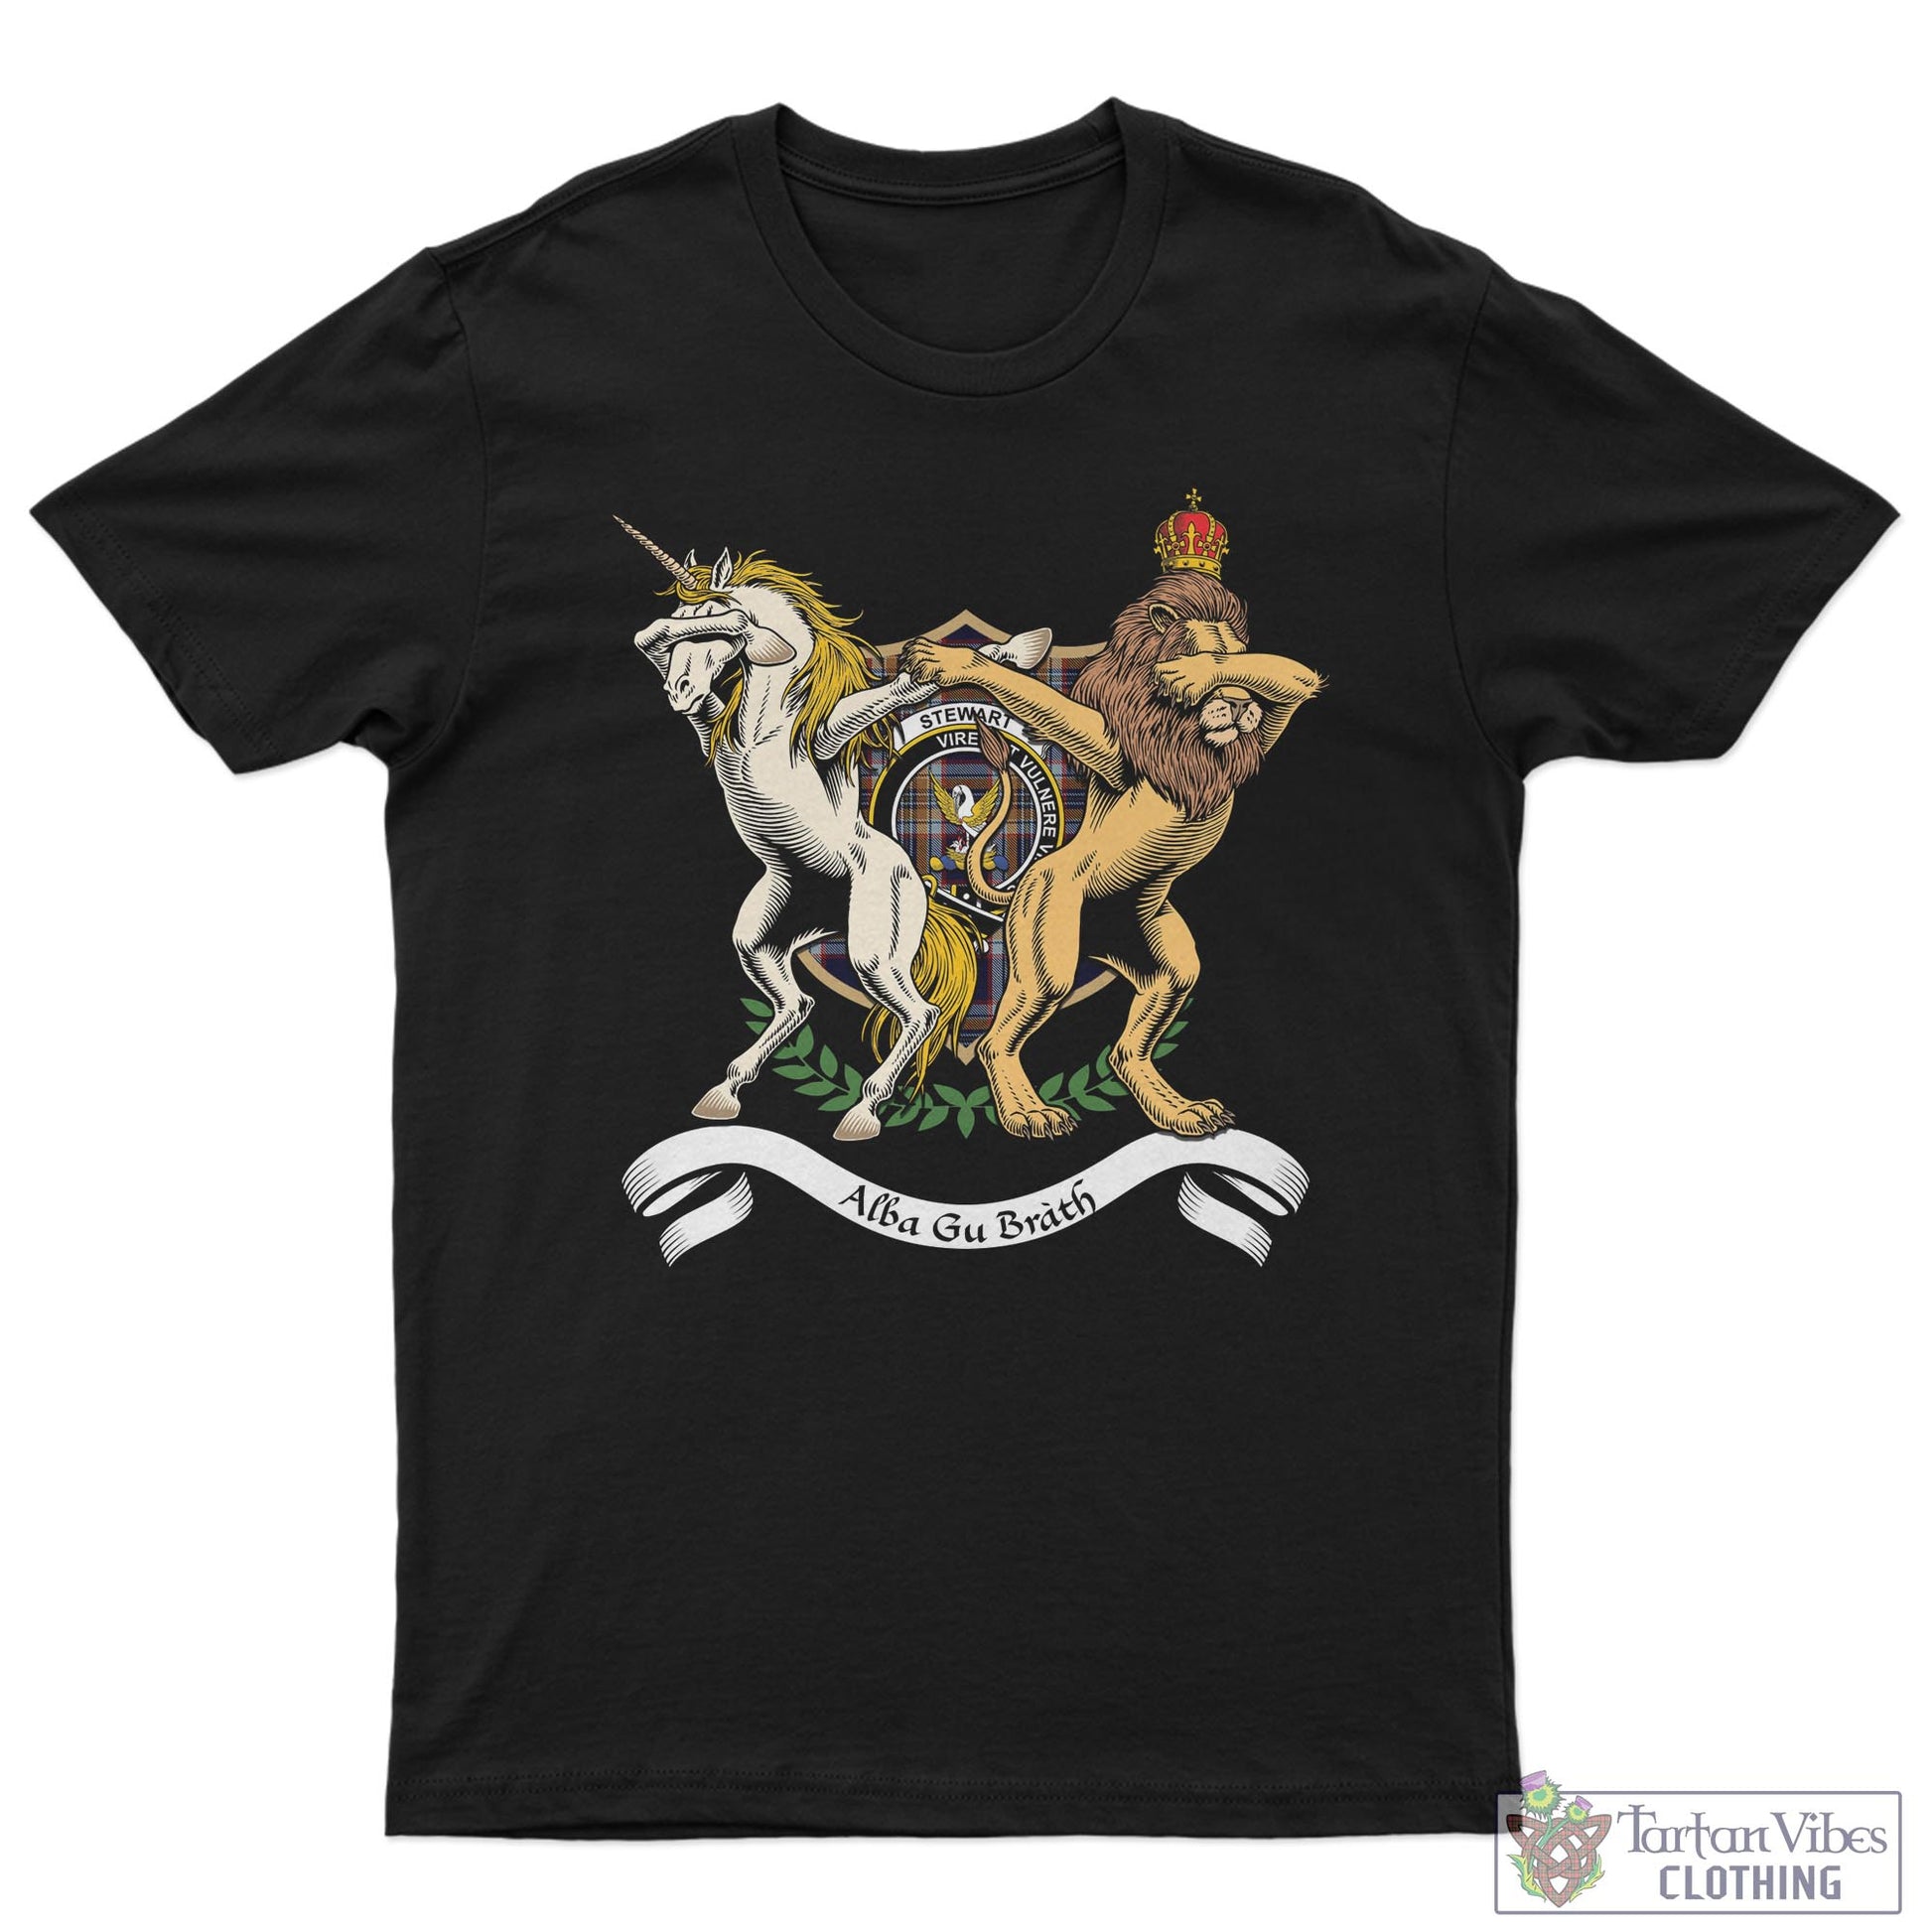 Tartan Vibes Clothing Stewart Navy Family Crest Cotton Men's T-Shirt with Scotland Royal Coat Of Arm Funny Style